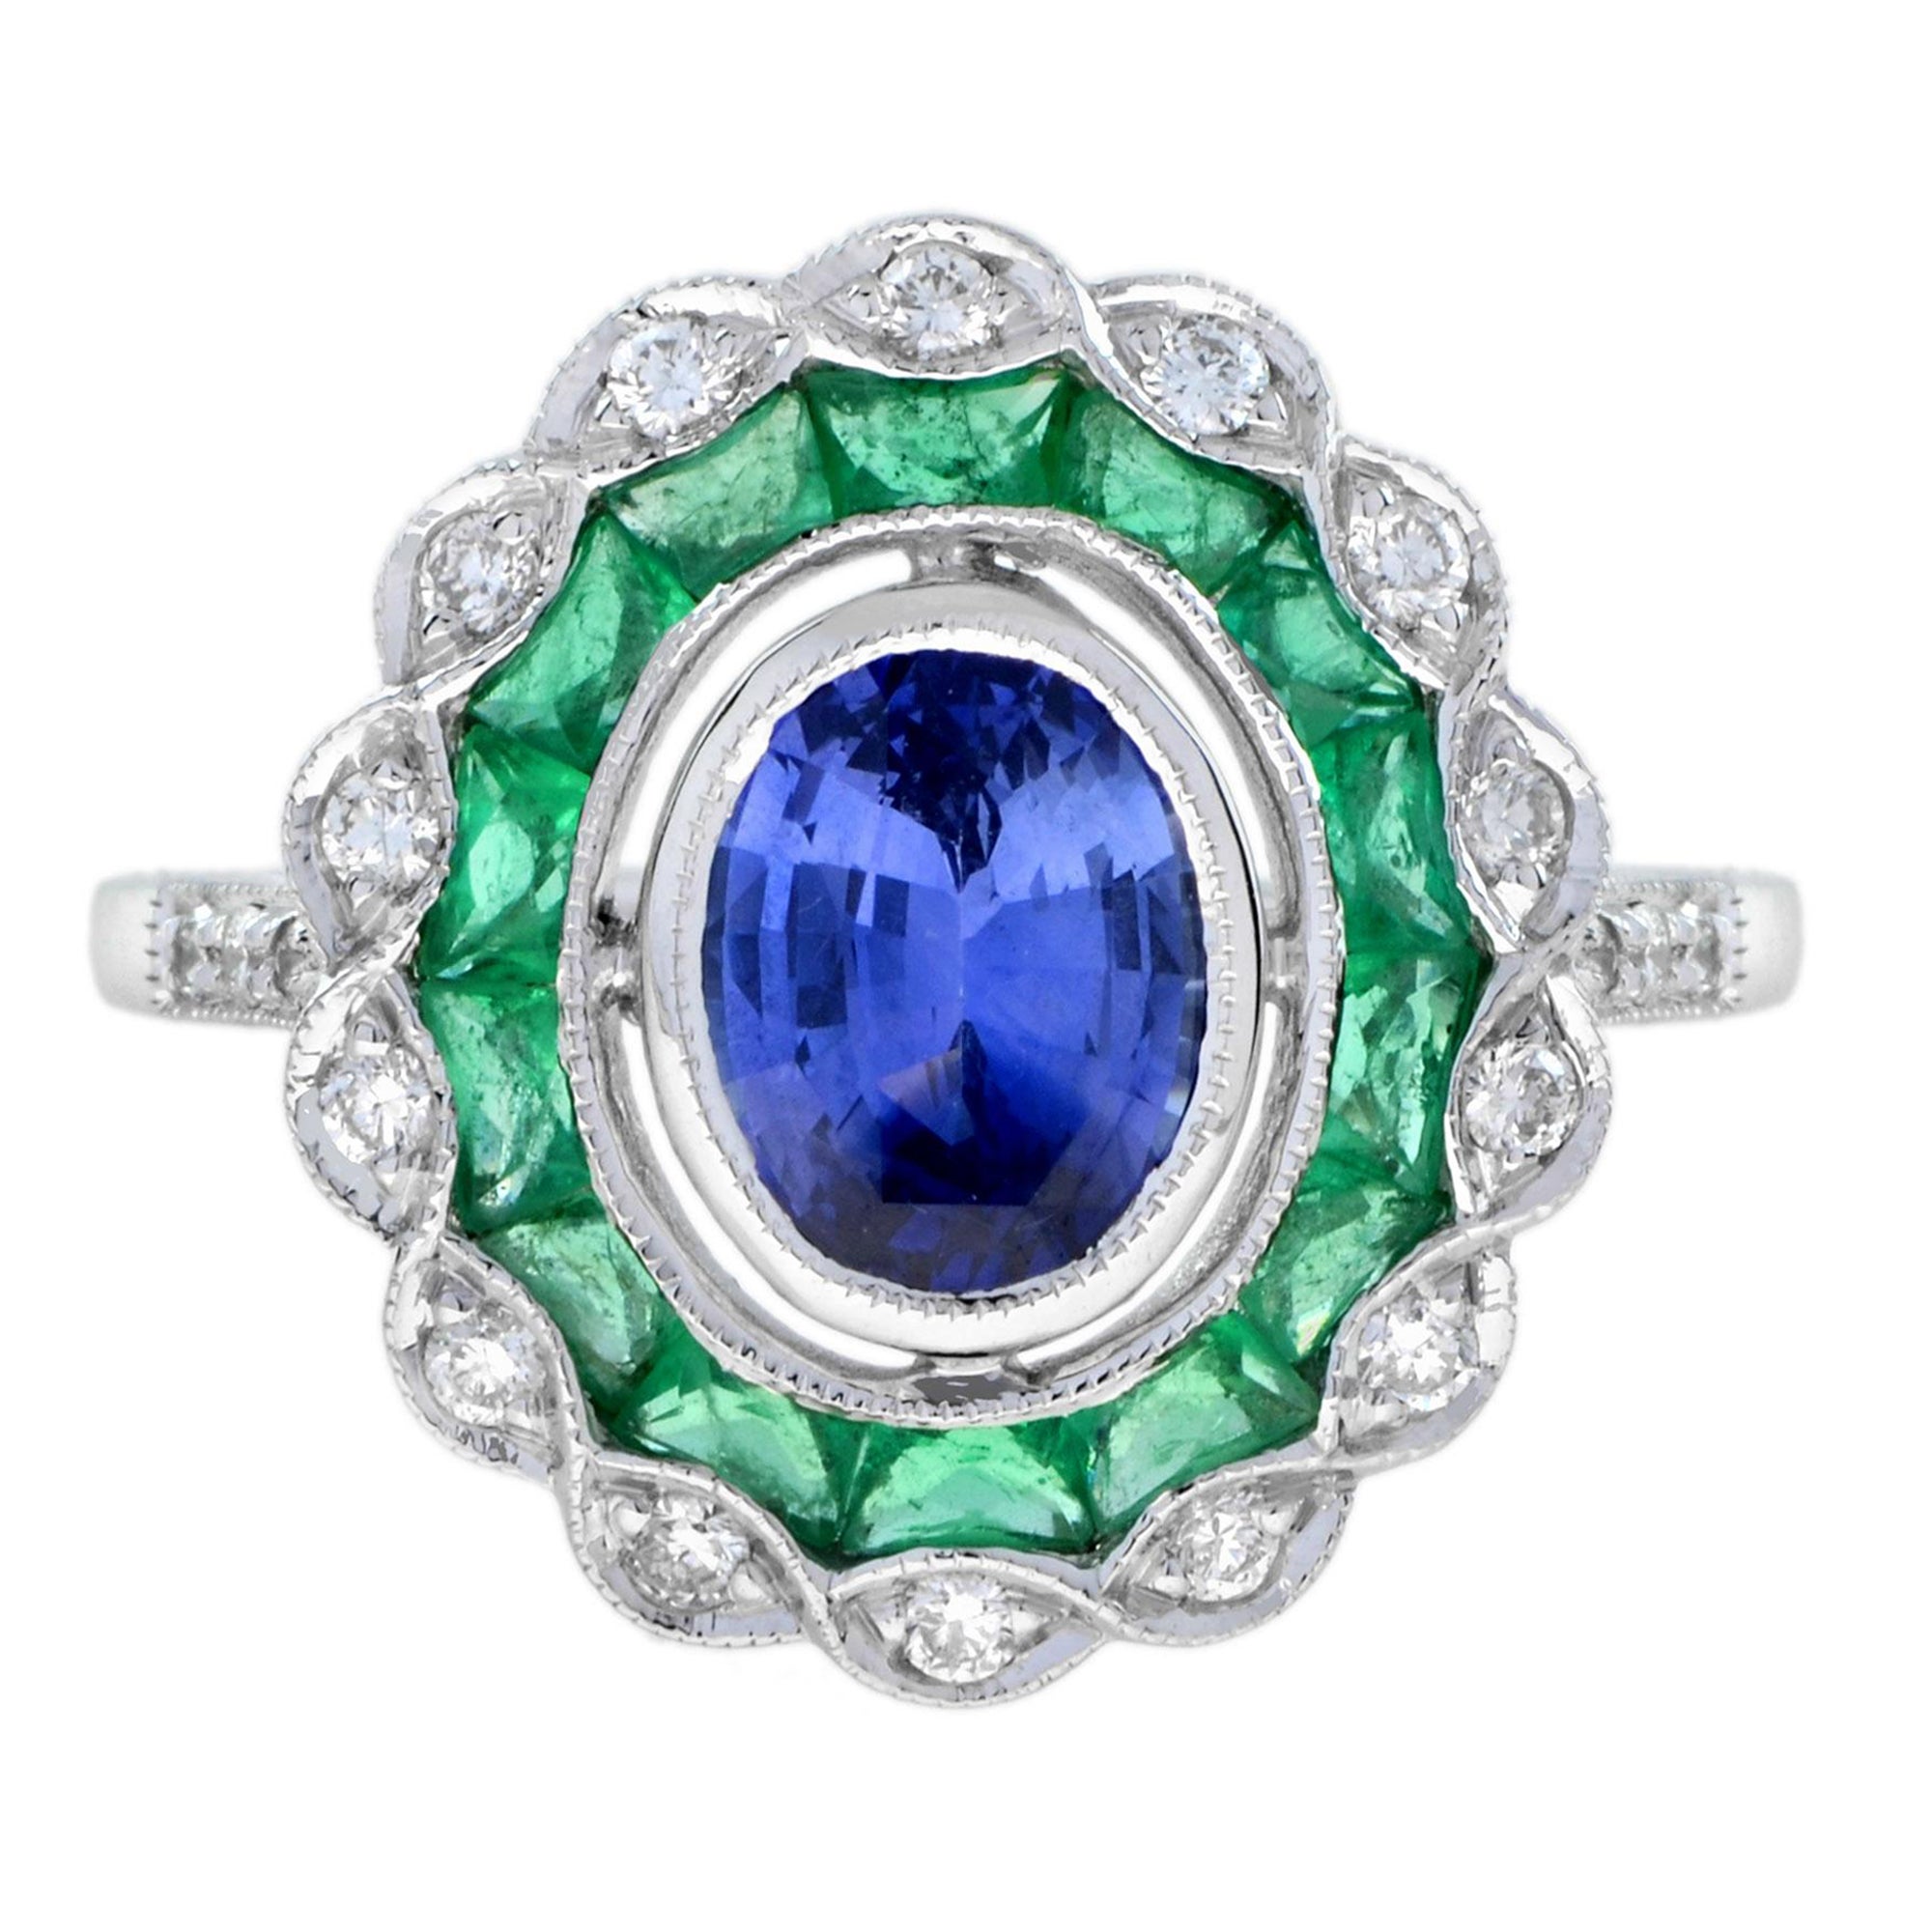 Oval Ceylon Sapphire with Emerald Diamond Art Deco Style Halo Ring in White Gold